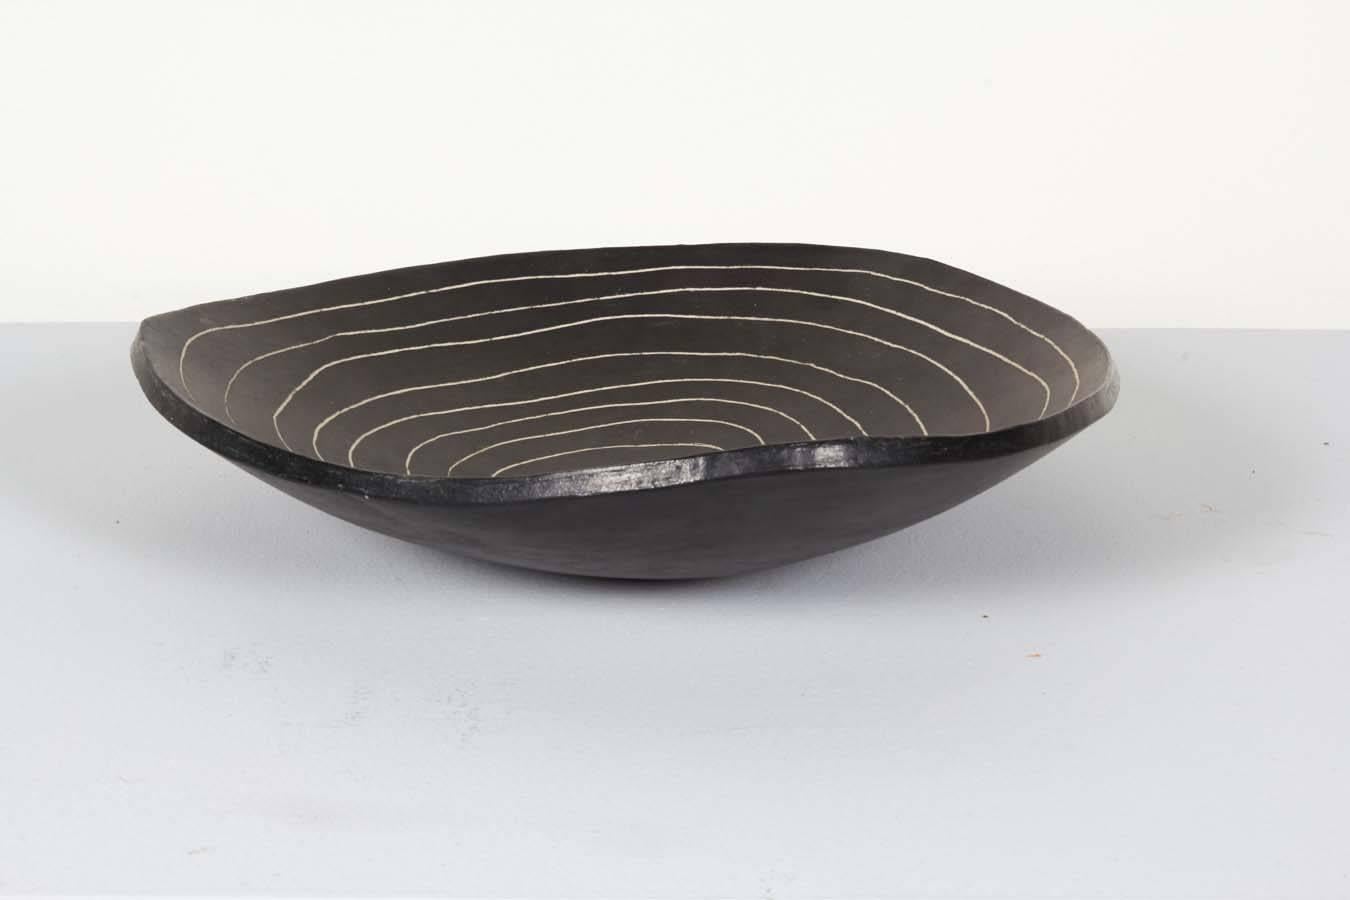 Etched Ceramic Bowl by Marianne Vissiere